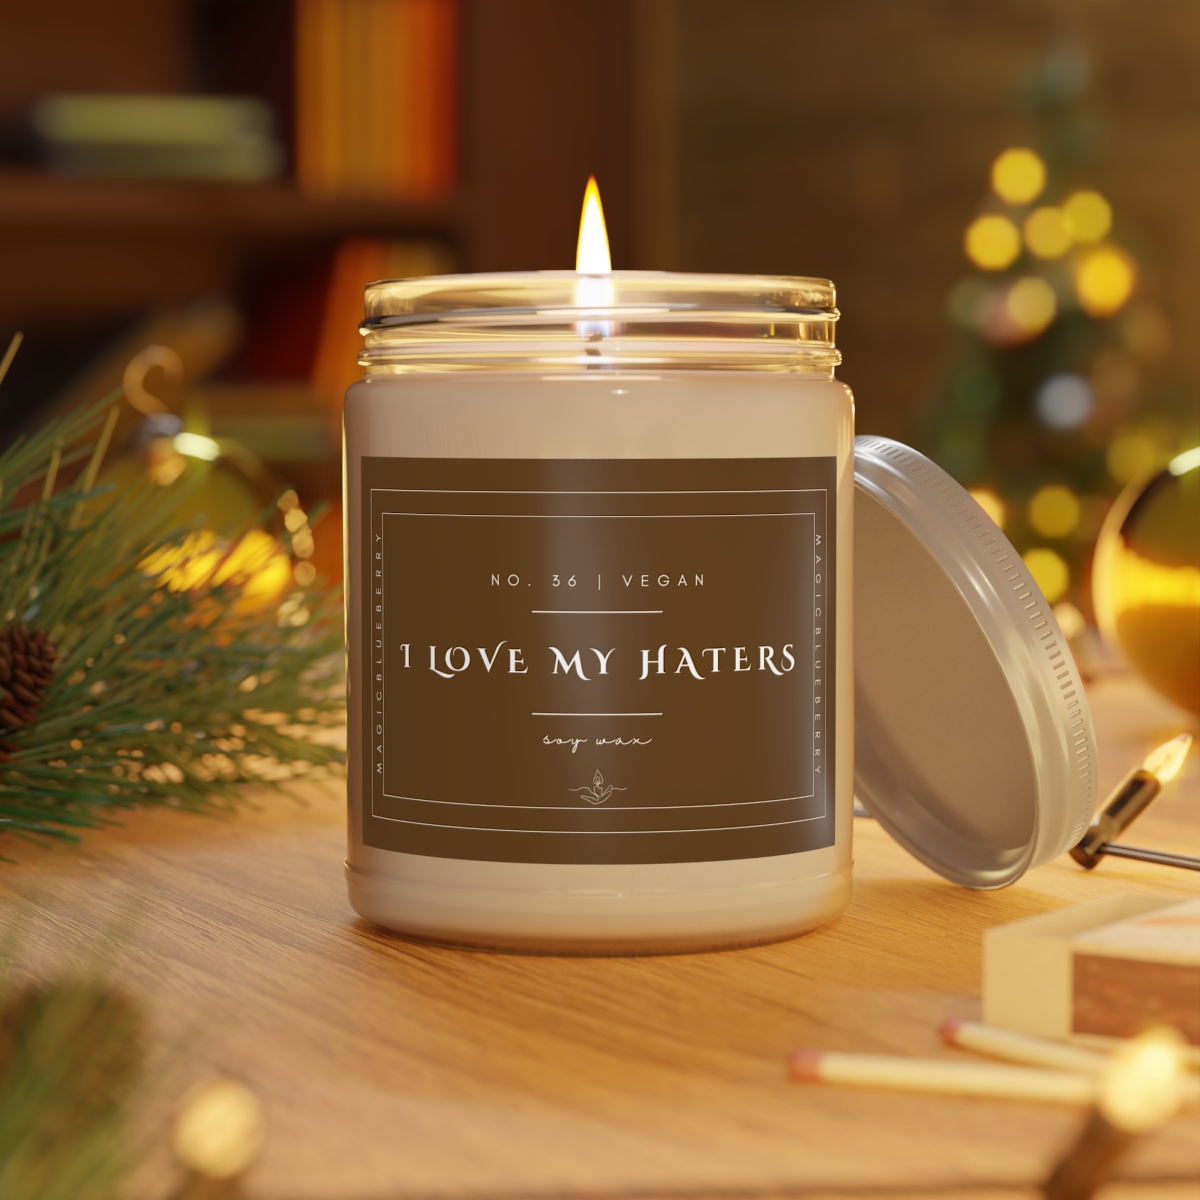 I Love My Haters - Scented Soy Wax Candle | Clear Jar | Vegan Candle | Coconut Soy Candle 9oz | Aromatherapy product thumbnail image